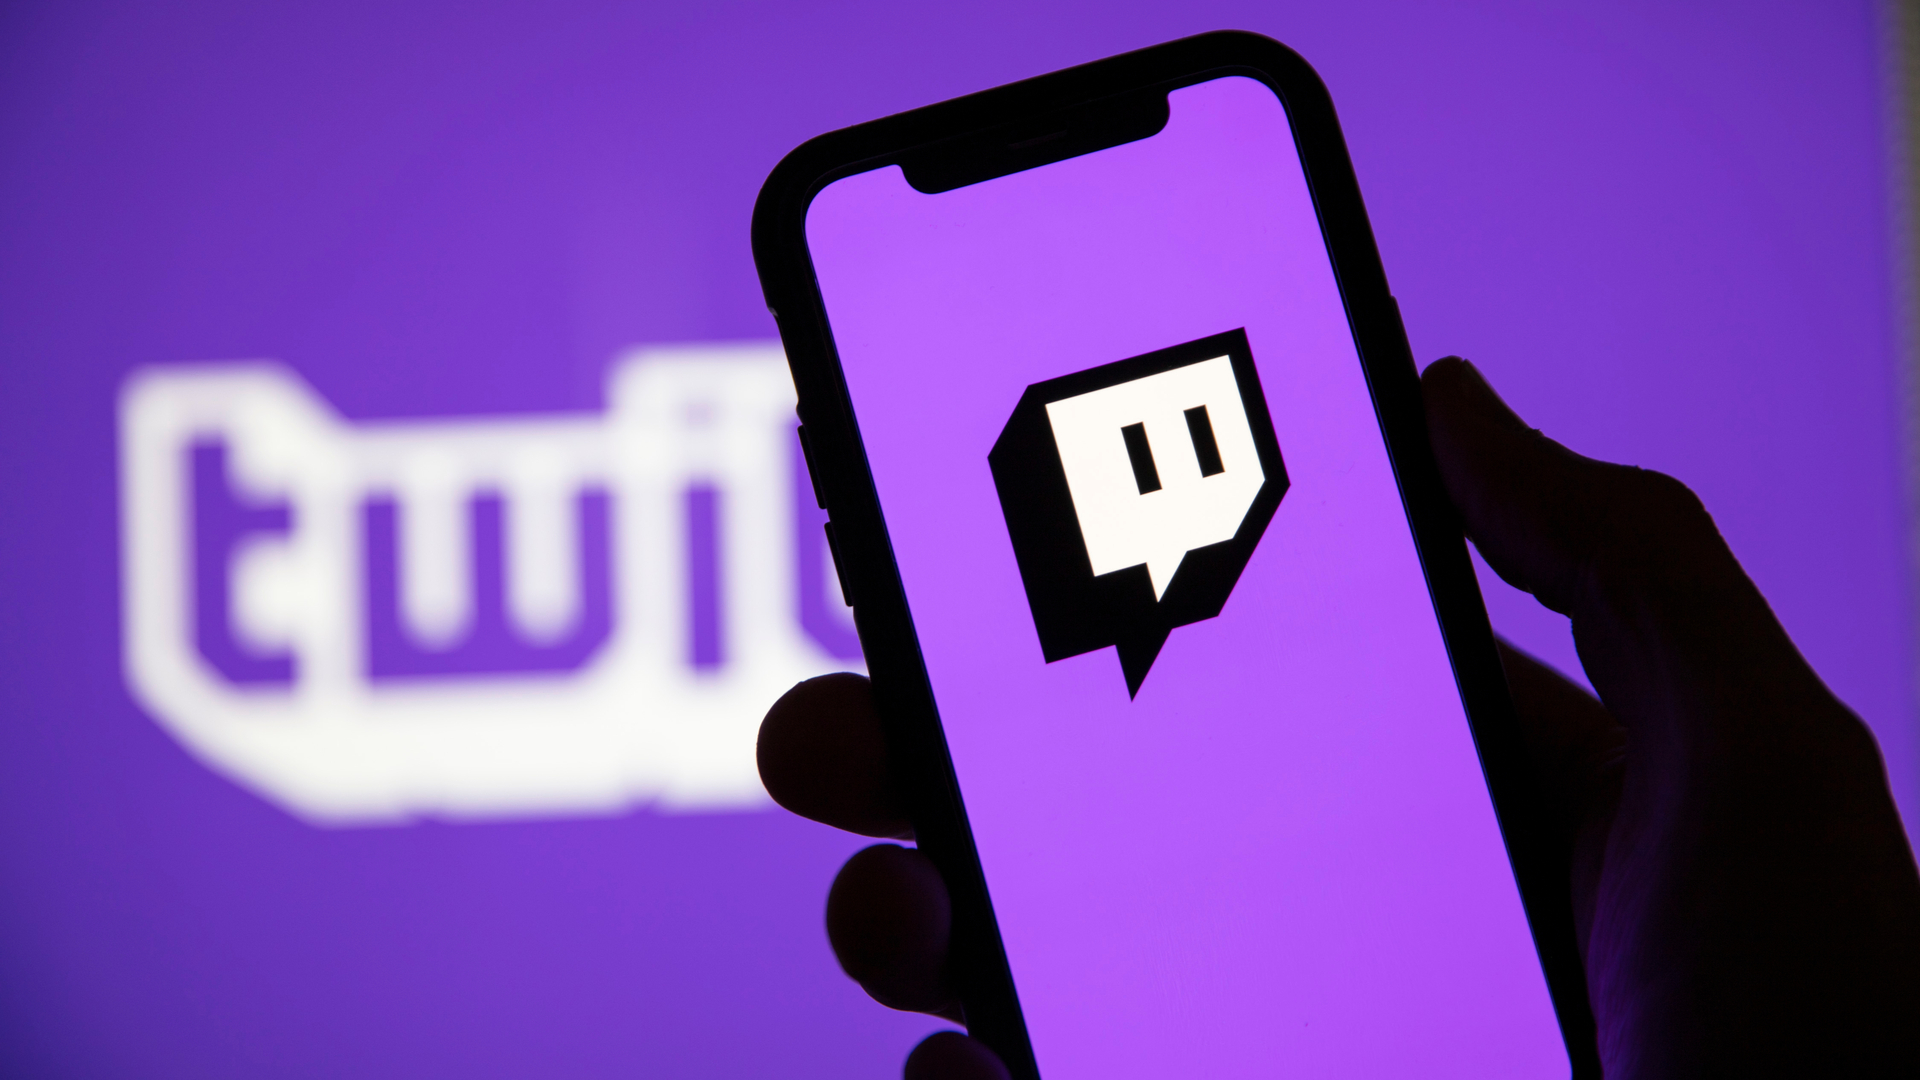 Twitch data breach exposes "everything" in possible "hacktivism". How